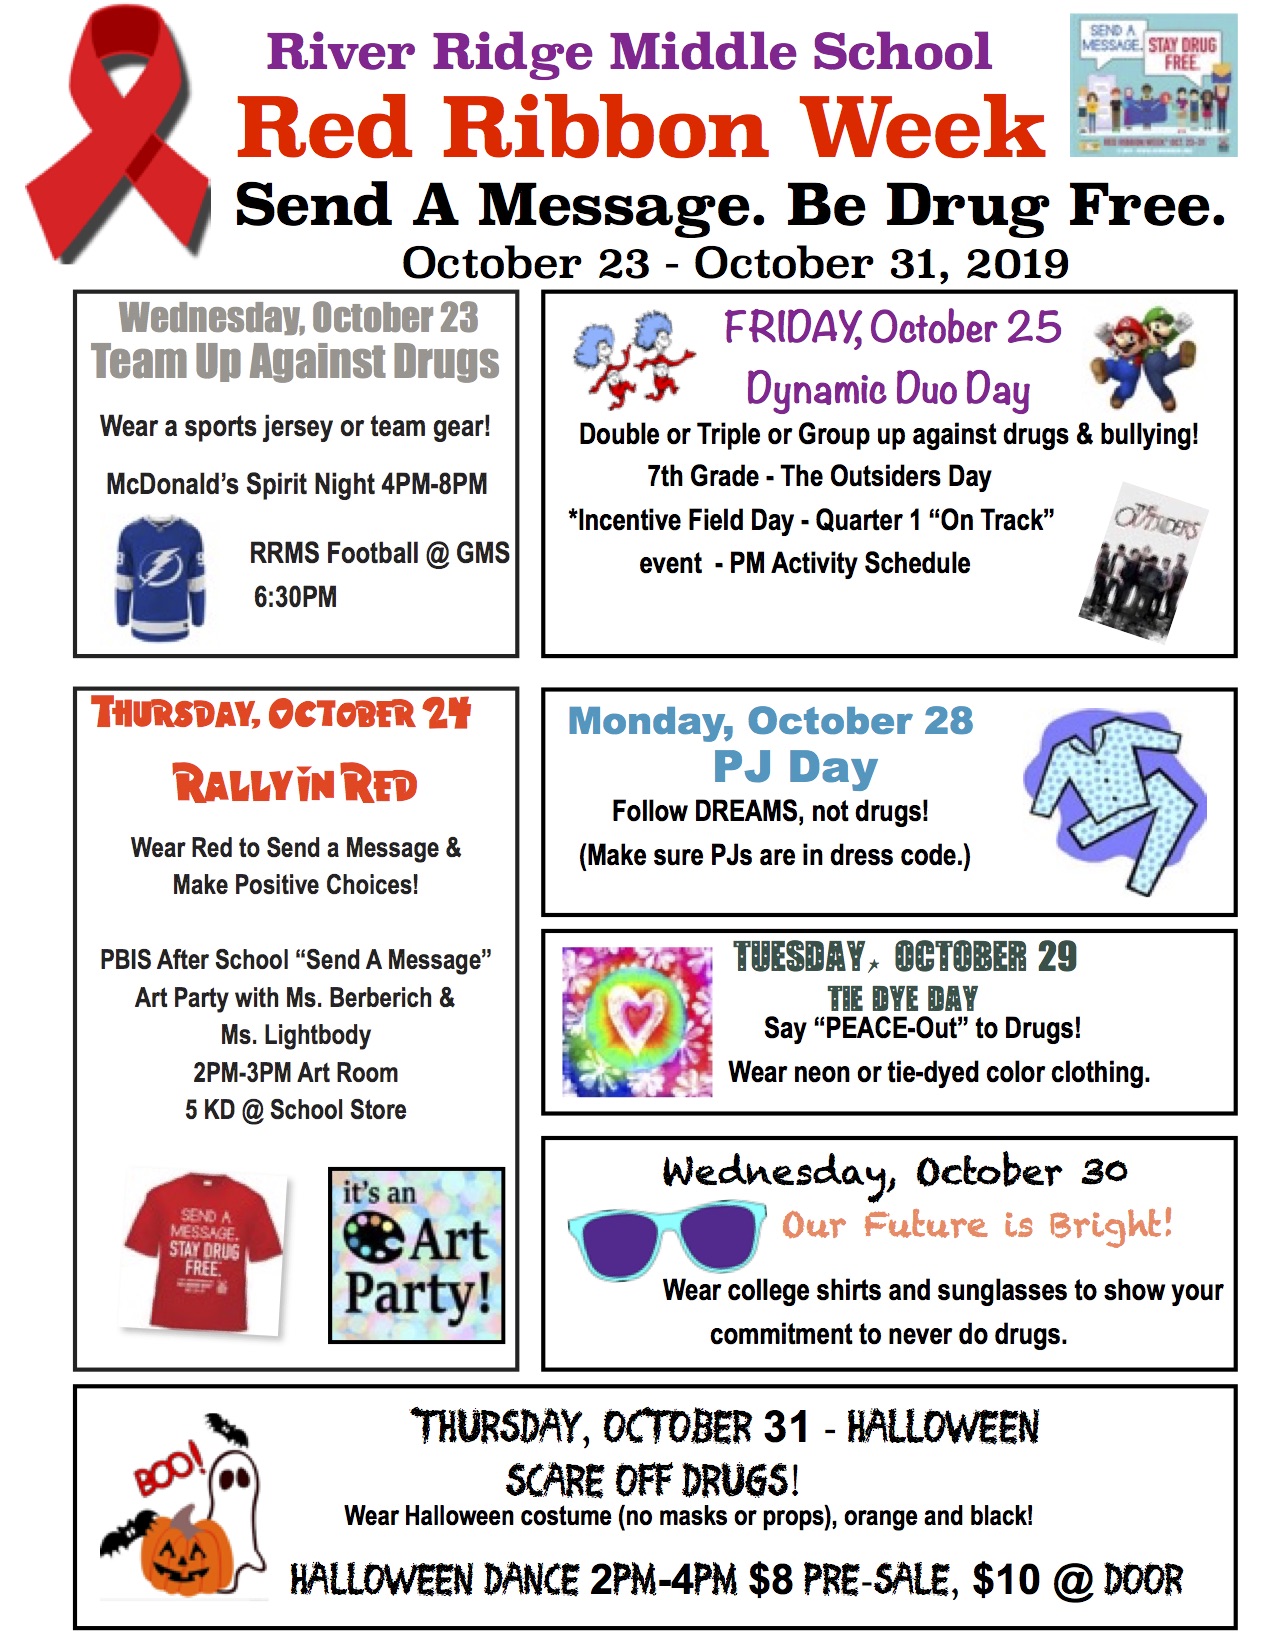 Event planned to kick-off Red Ribbon Week, Community News